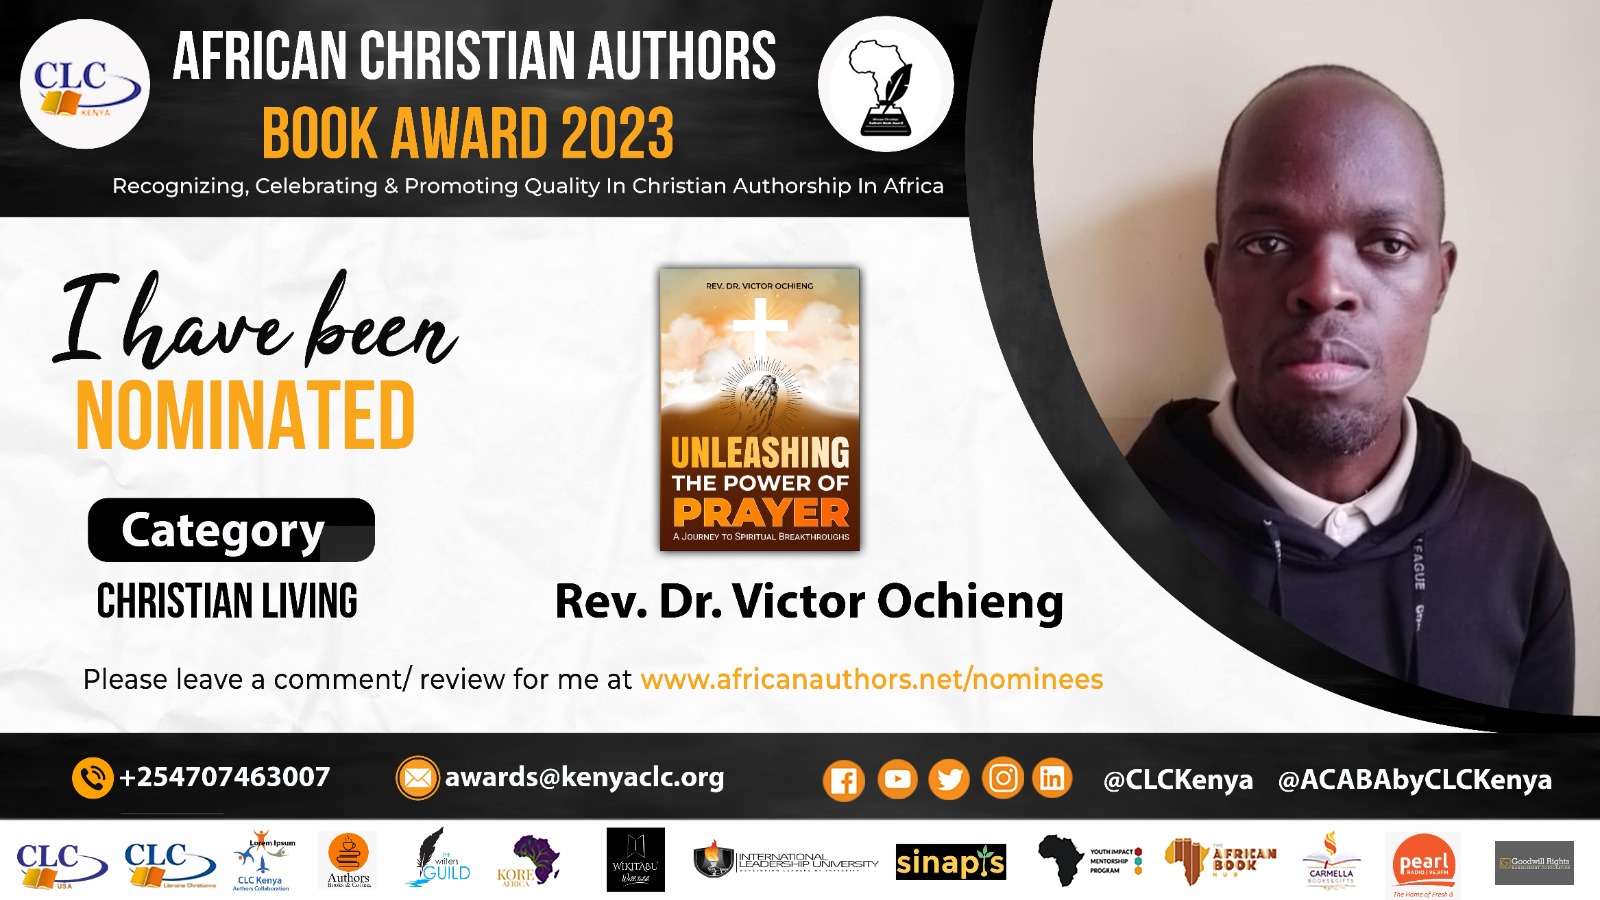 Dr. Victor Ochieng Describes His Writing Journey As One Made Possible By The Grace Of God.